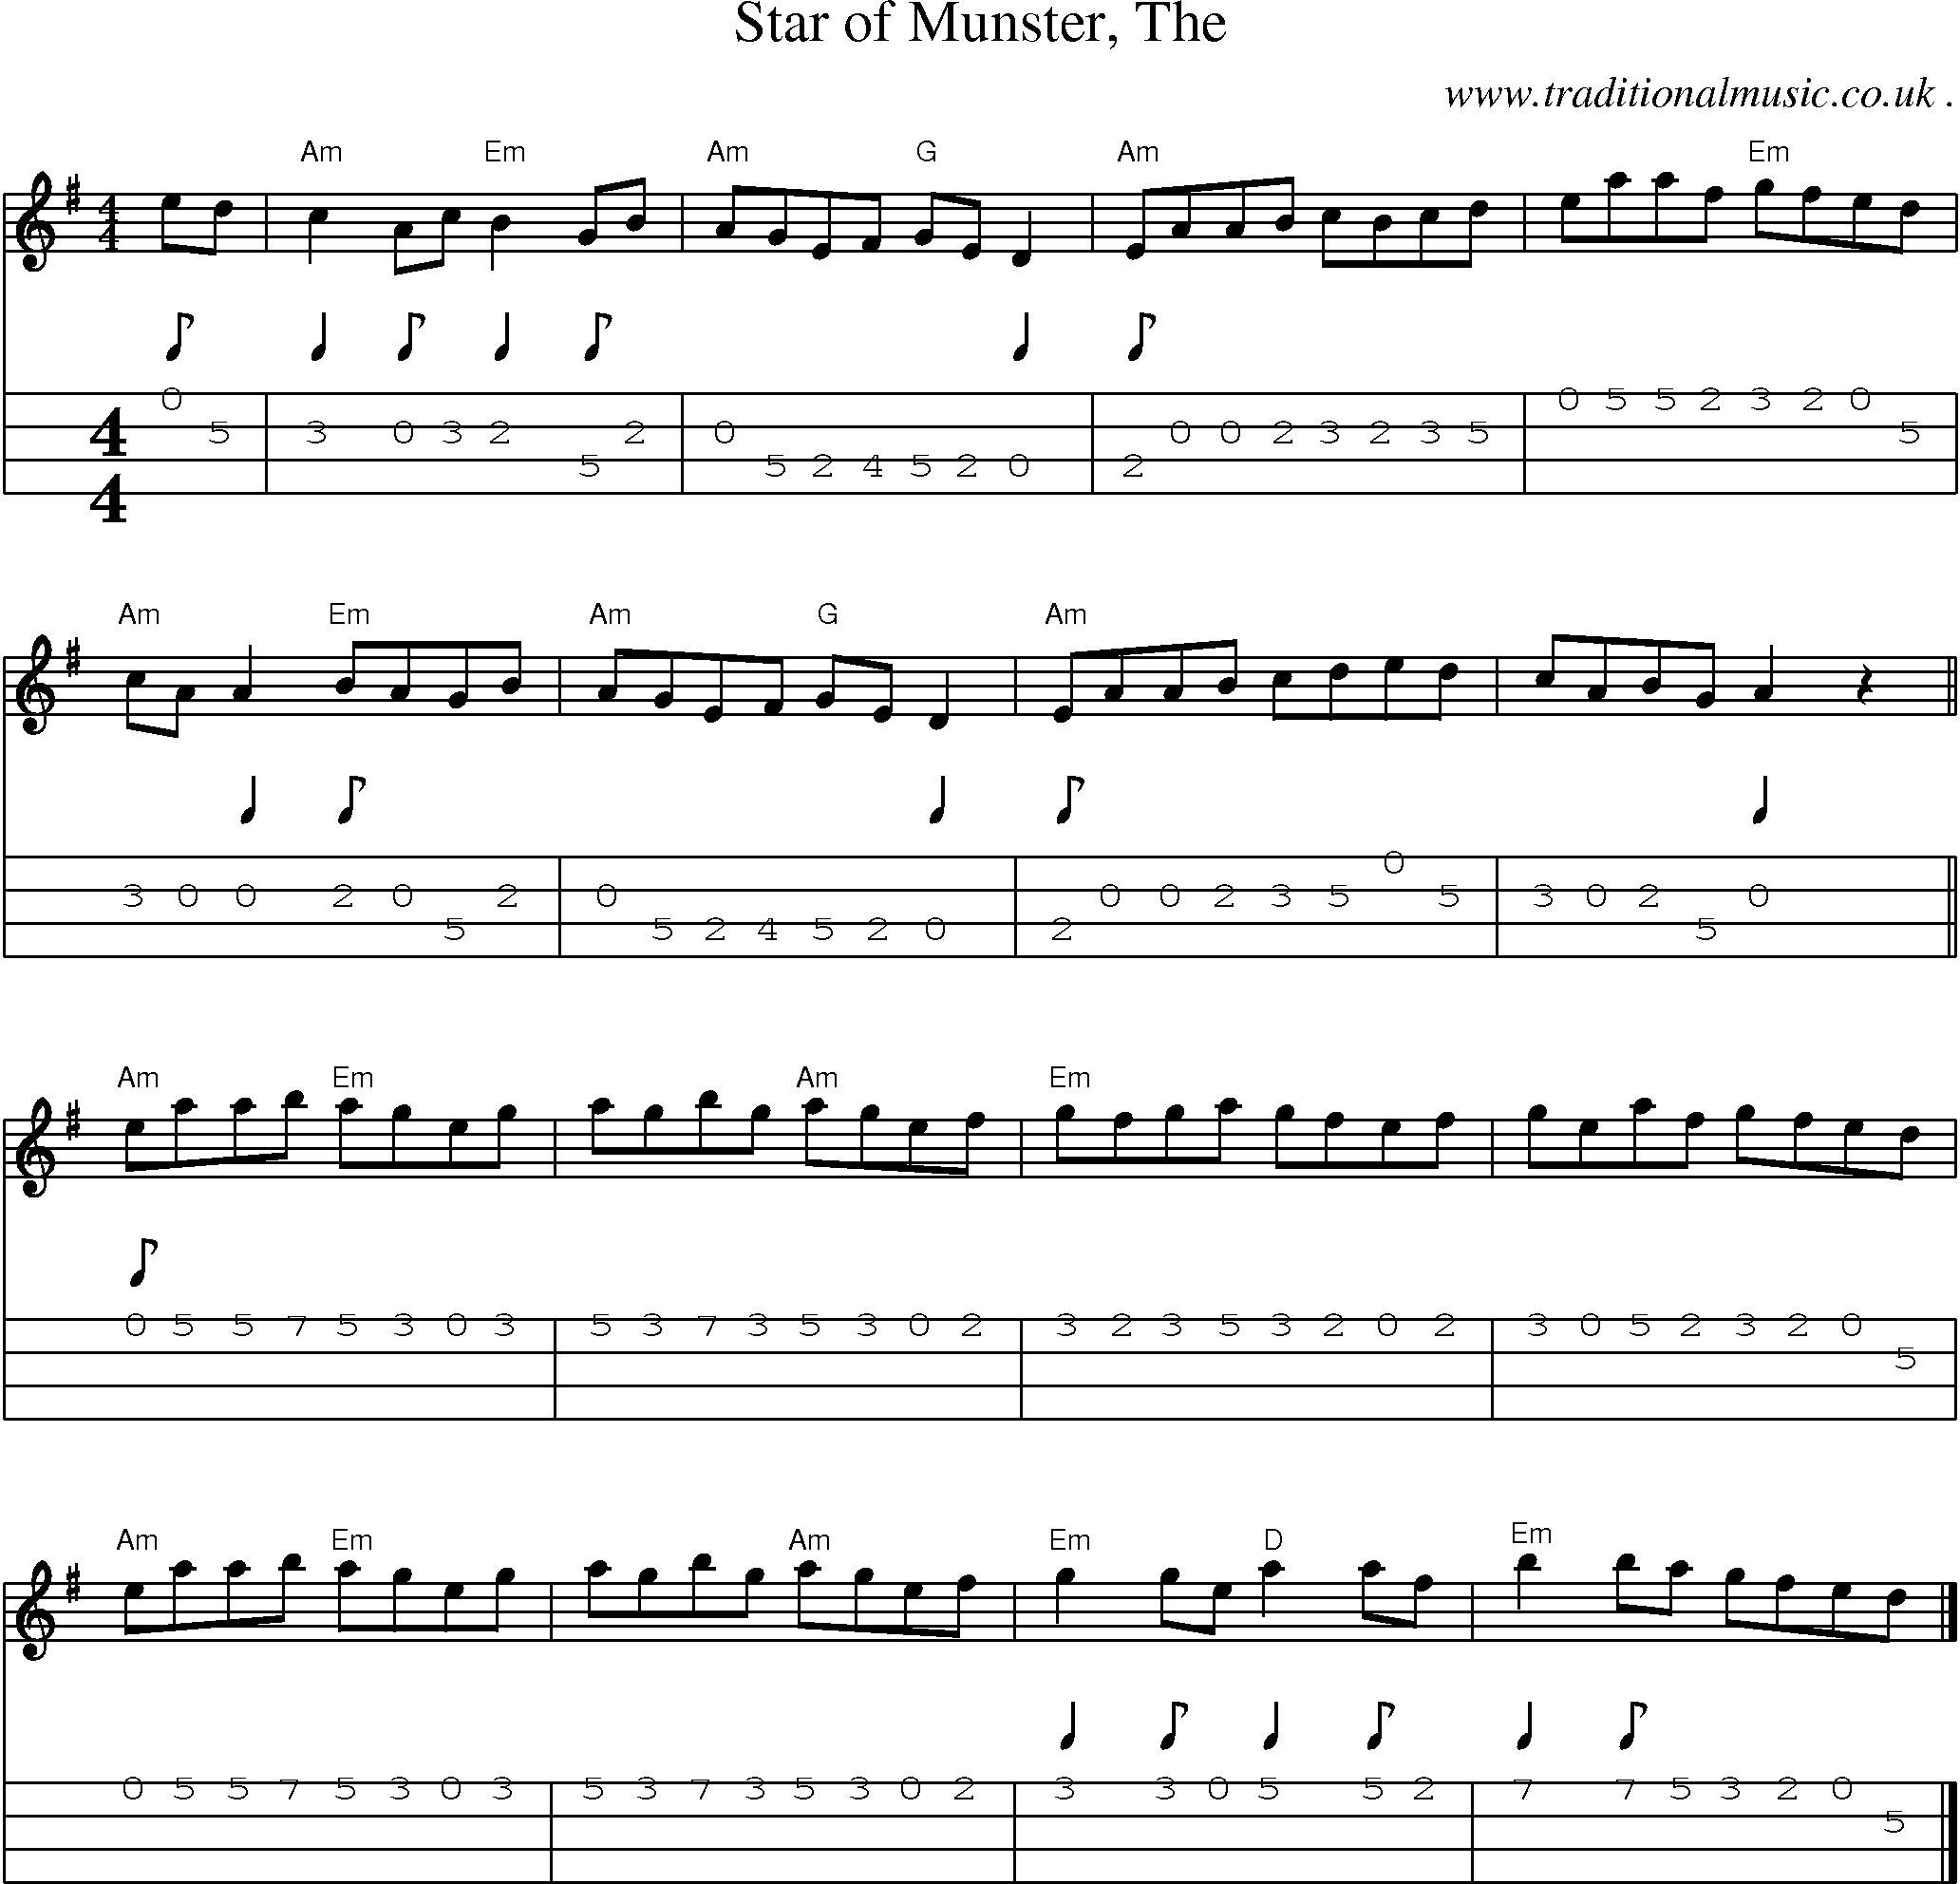 Music Score and Guitar Tabs for Star of Munster The1